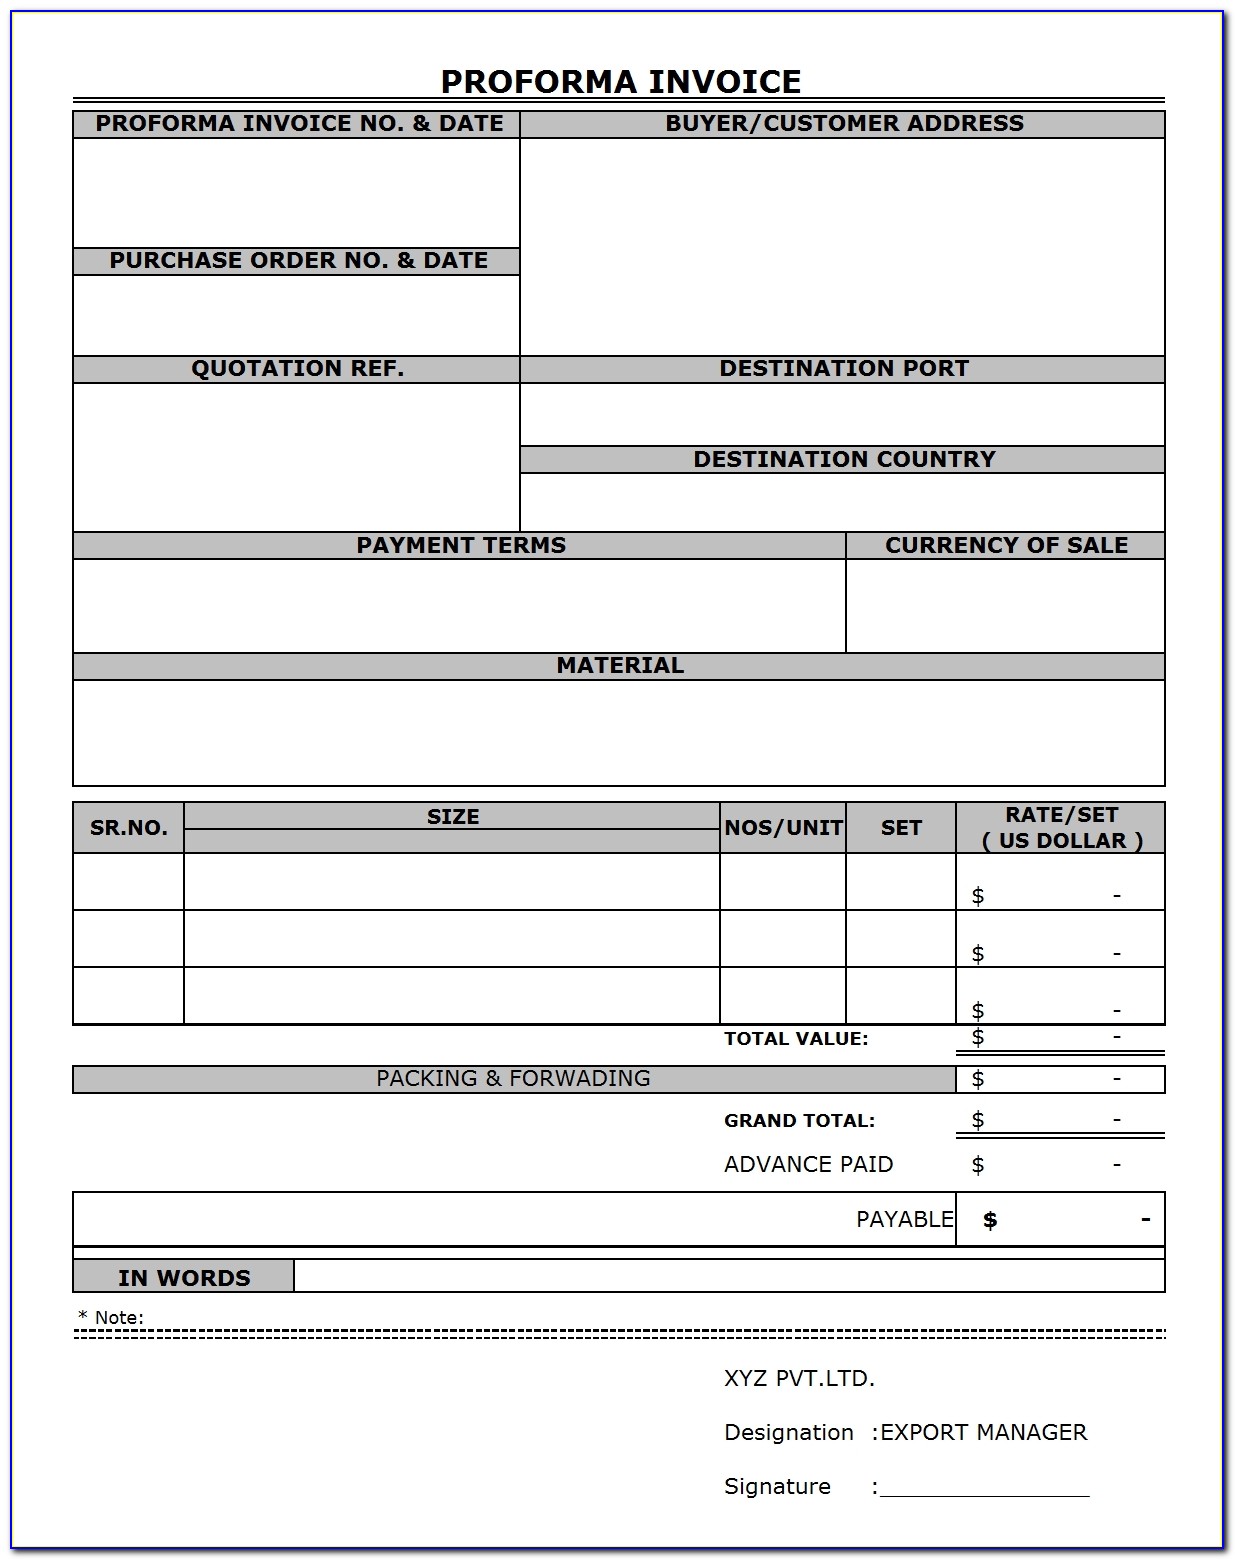 Proforma Invoice Meaning In Bengali